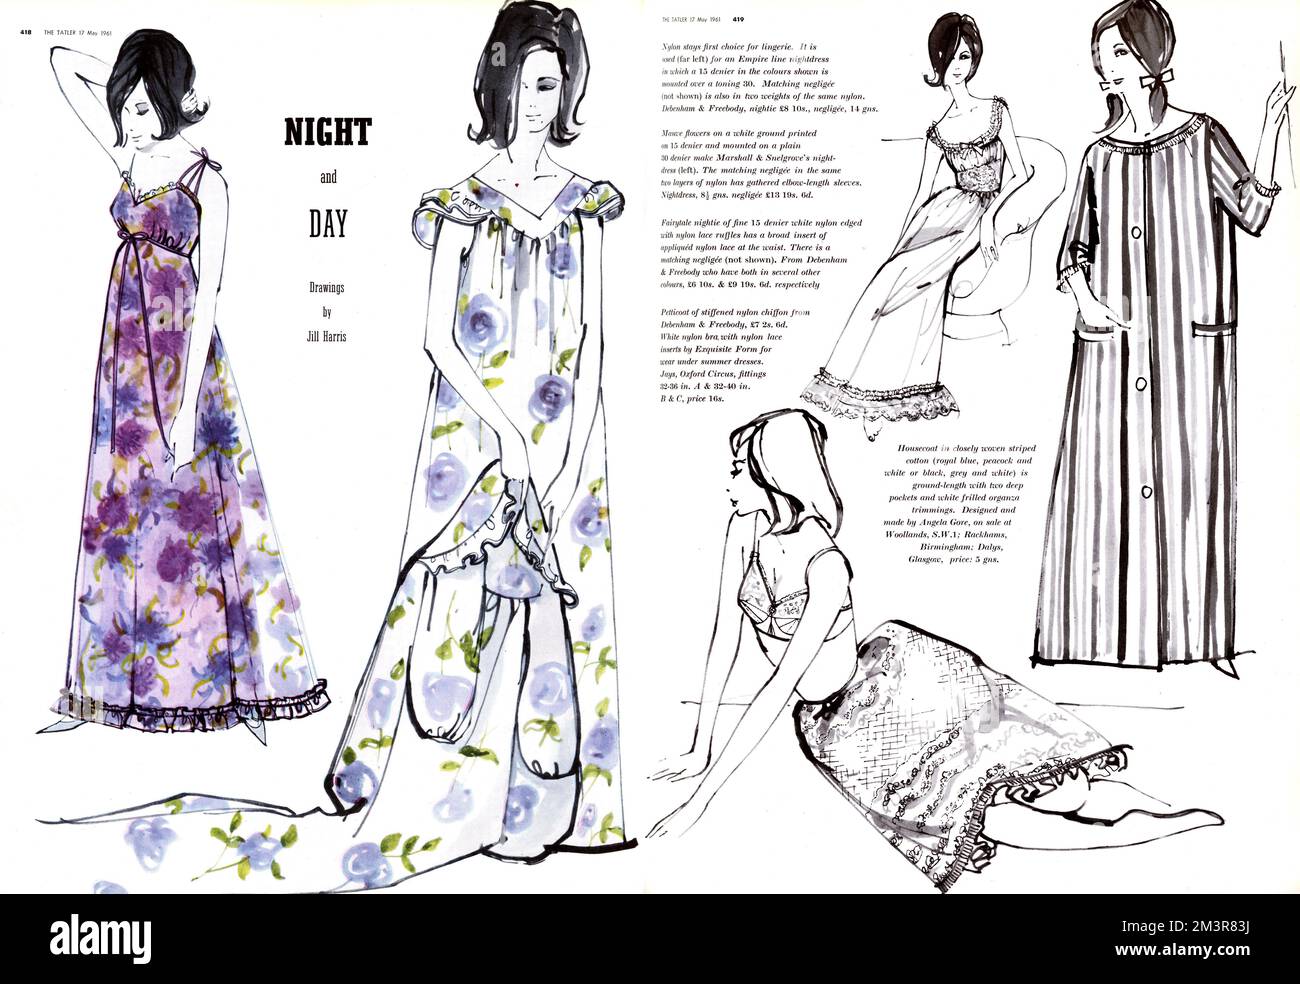 Night and day fashions from the 1960s. From left to right: A Debenham &amp; Freebody empire line nylon nightdress in which a 15 denier in the colours shown is mounted over a toning 30.  Marshall and Snelgrove's nightdress with mauve flowers on a white background.  Debenham &amp; Freebody petticoat of stiffened nylon chiffon and white nylon bra with lace inserts by Exquisite Forms.   Fairytale nightie from Debenham &amp; Freebody of fine 15 denier white nylon edged with nylon lace ruffles.  Housecoat in closely woven striped cotton, ground-length with two deep pockets and white frilled organza Stock Photo